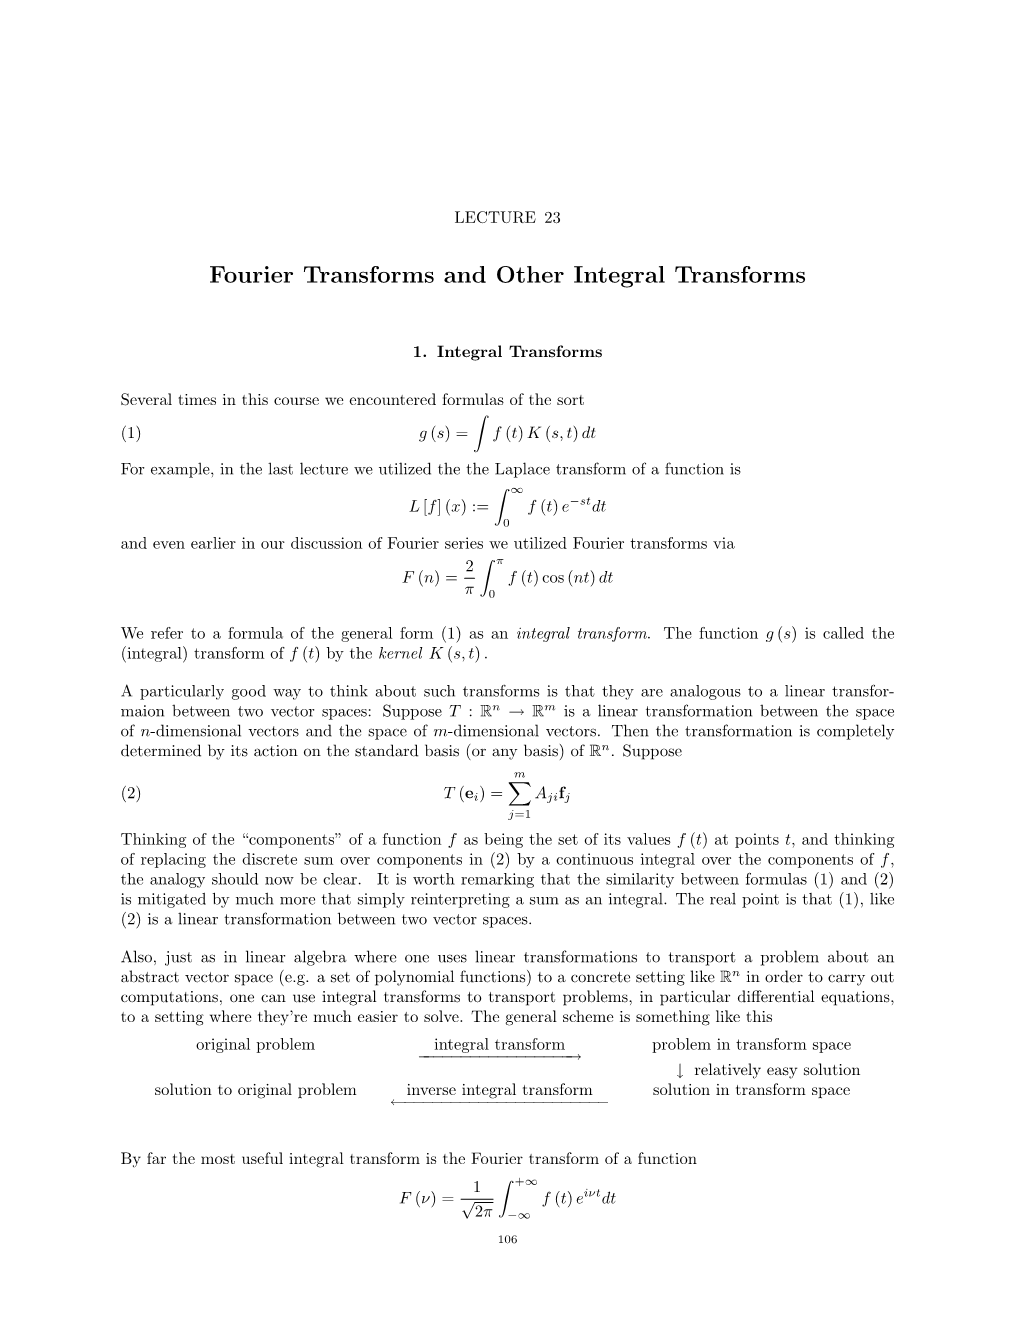 Fourier Transforms and Other Integral Transforms